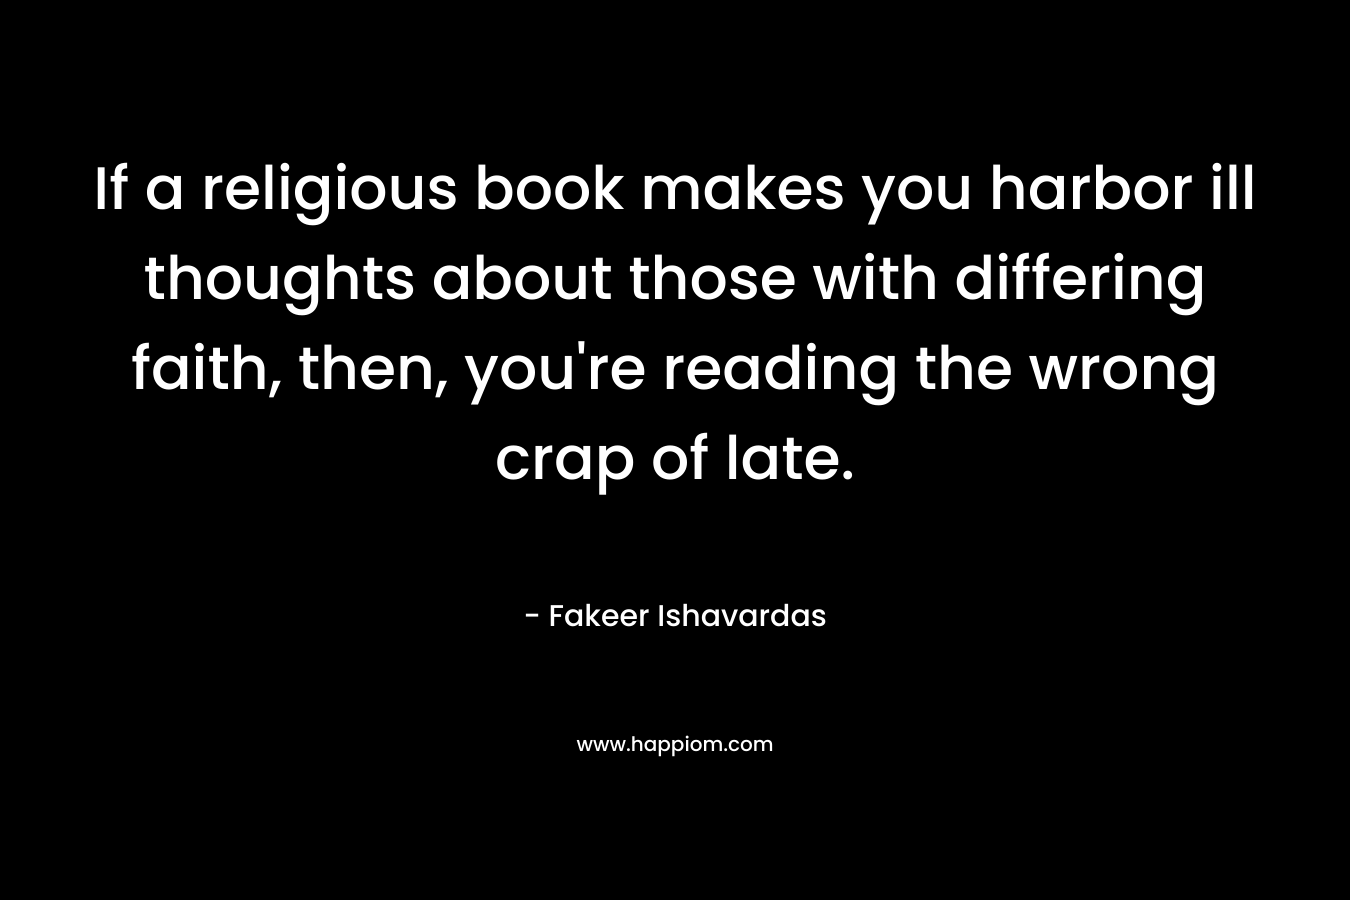 If a religious book makes you harbor ill thoughts about those with differing faith, then, you're reading the wrong crap of late.